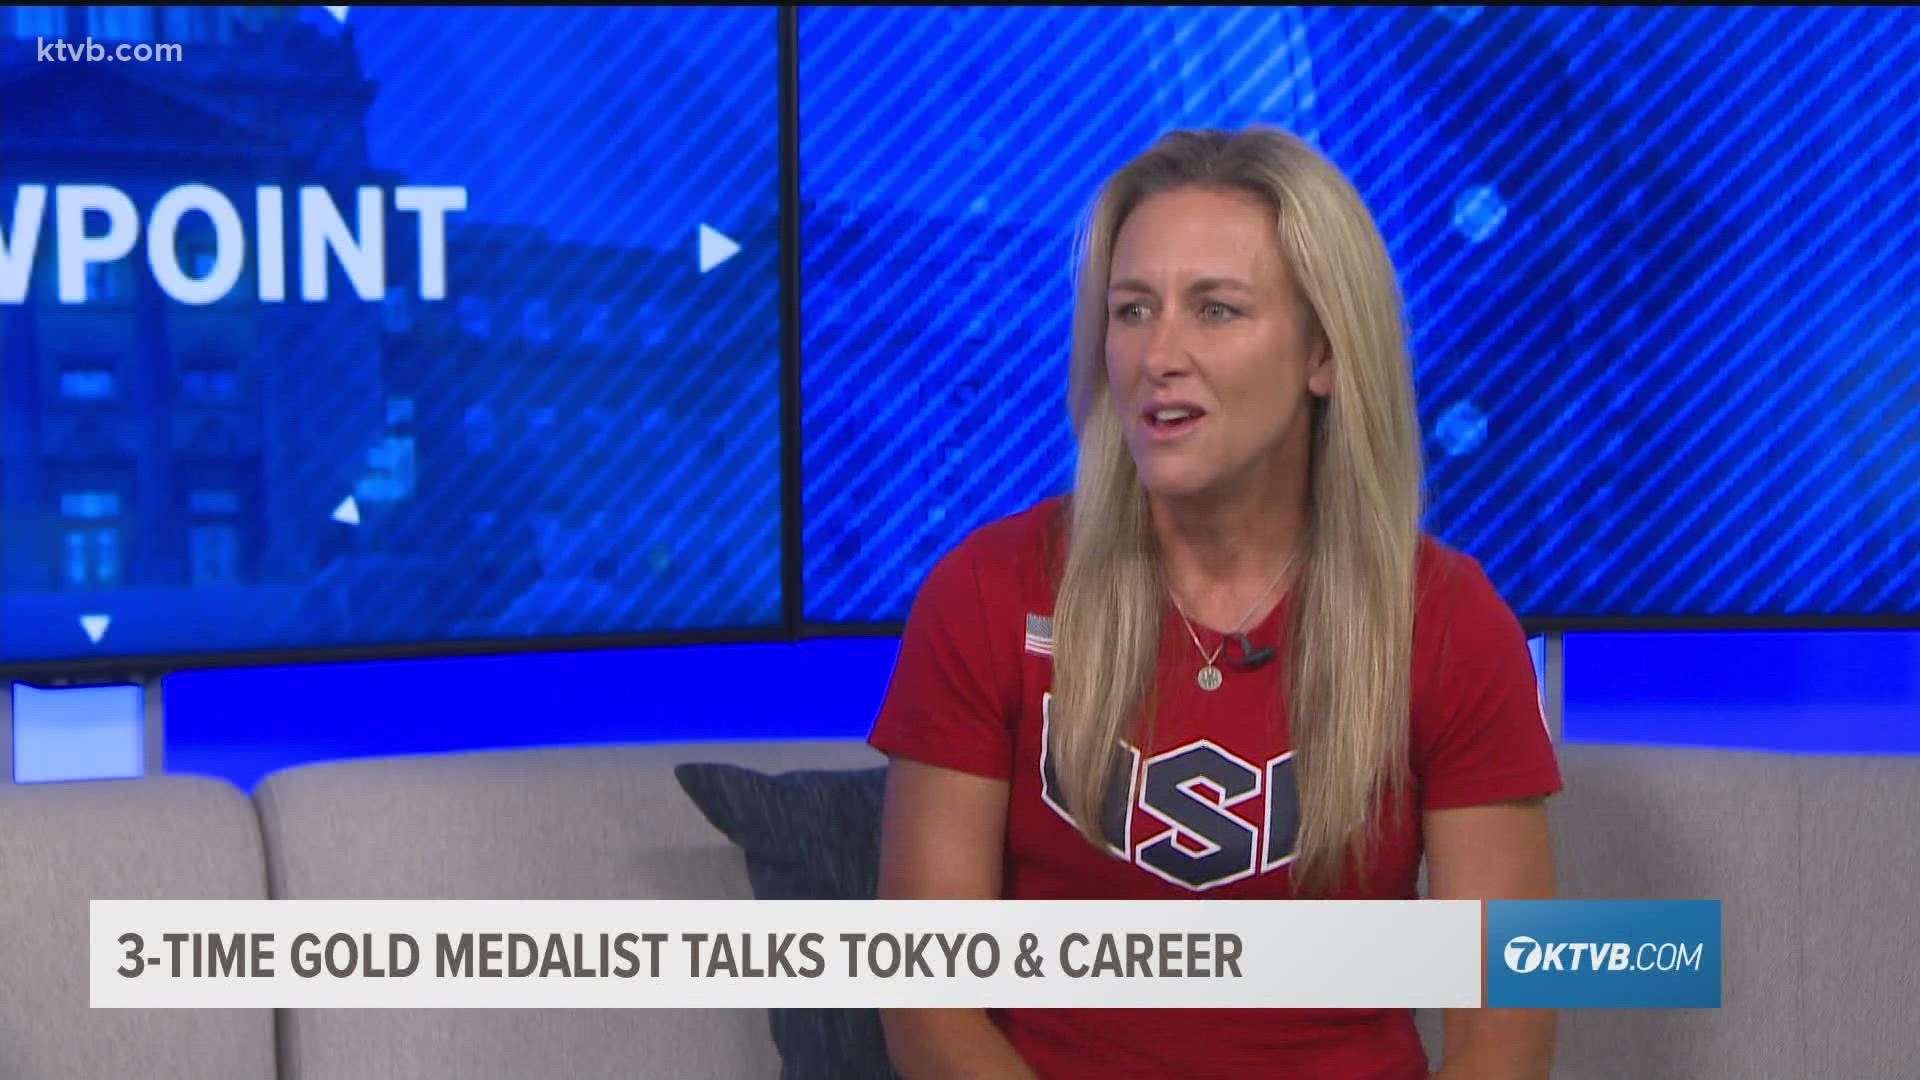 Boise's Kristin Armstrong discusses her best Olympic memories and gives her take on the challenges of the COVID-affected Tokyo Games and on the new sports this year.